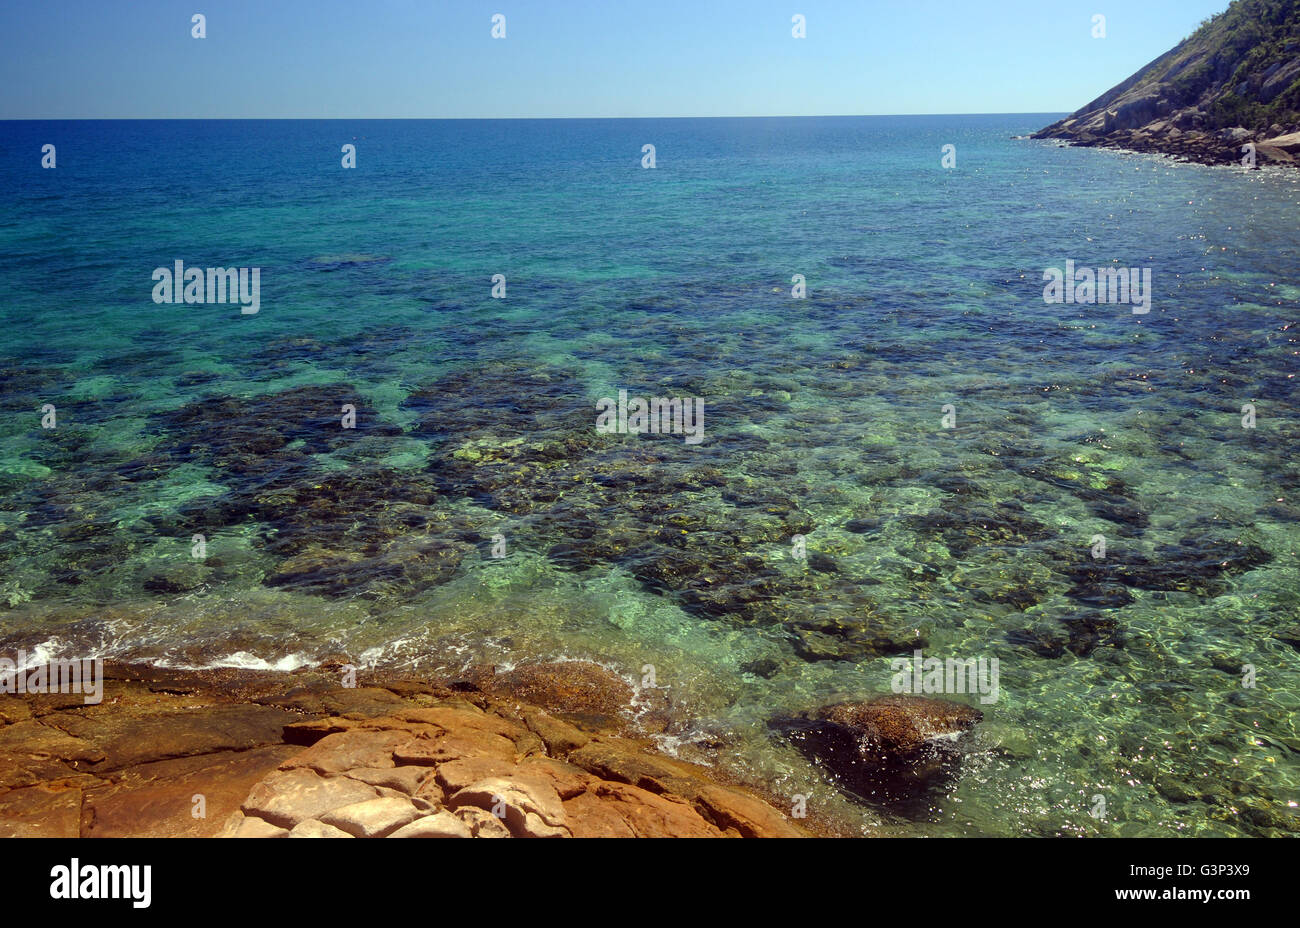 Some coral bleaching evident in shallow water at Turtle Bay, Lizard Island, Great Barrier Reef, Queensland, Australia Stock Photo